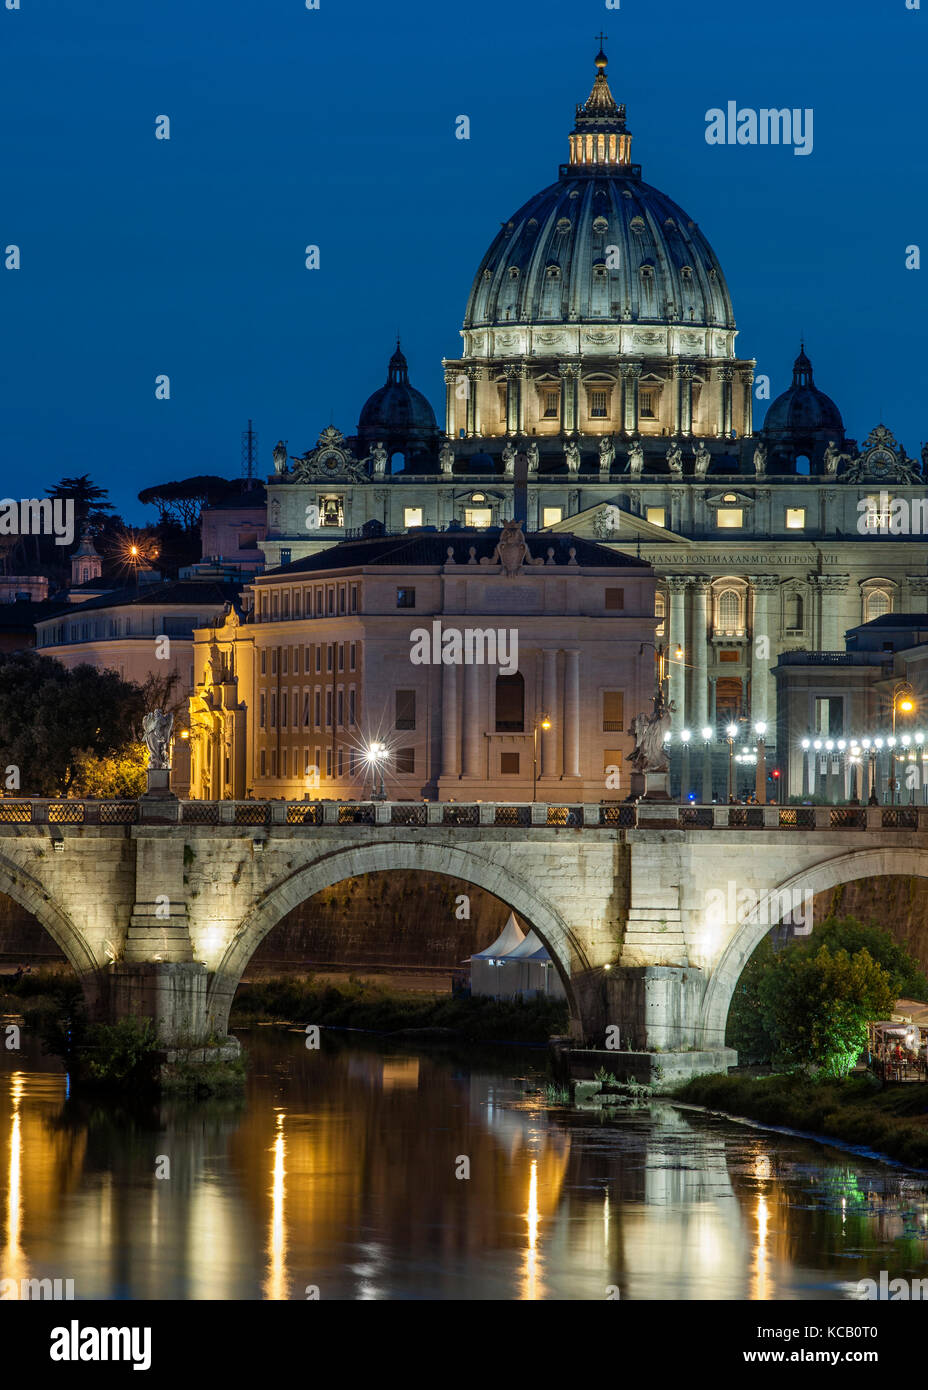 Dusk view of the dome of St Peter's Basilica, Ponte St Angelo and the Tiber River in Rome. Stock Photo